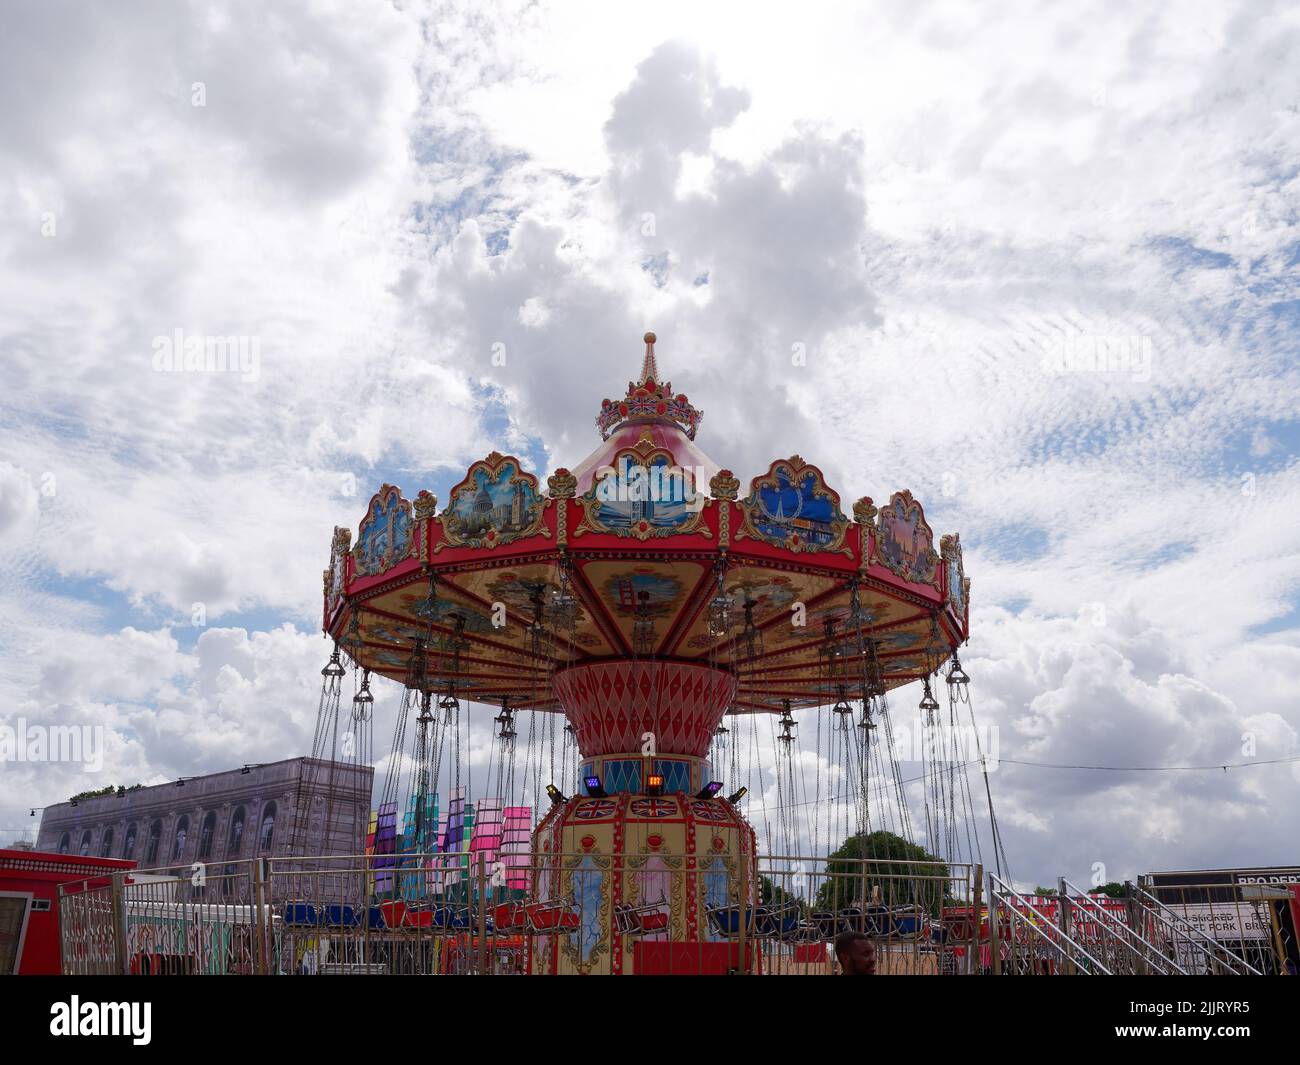 Londra, Greater London, Inghilterra, giugno 30 2022: Giro sul fairground swing alias giro sul fairground swing all'interno dell'arena BST Byde Park Foto Stock